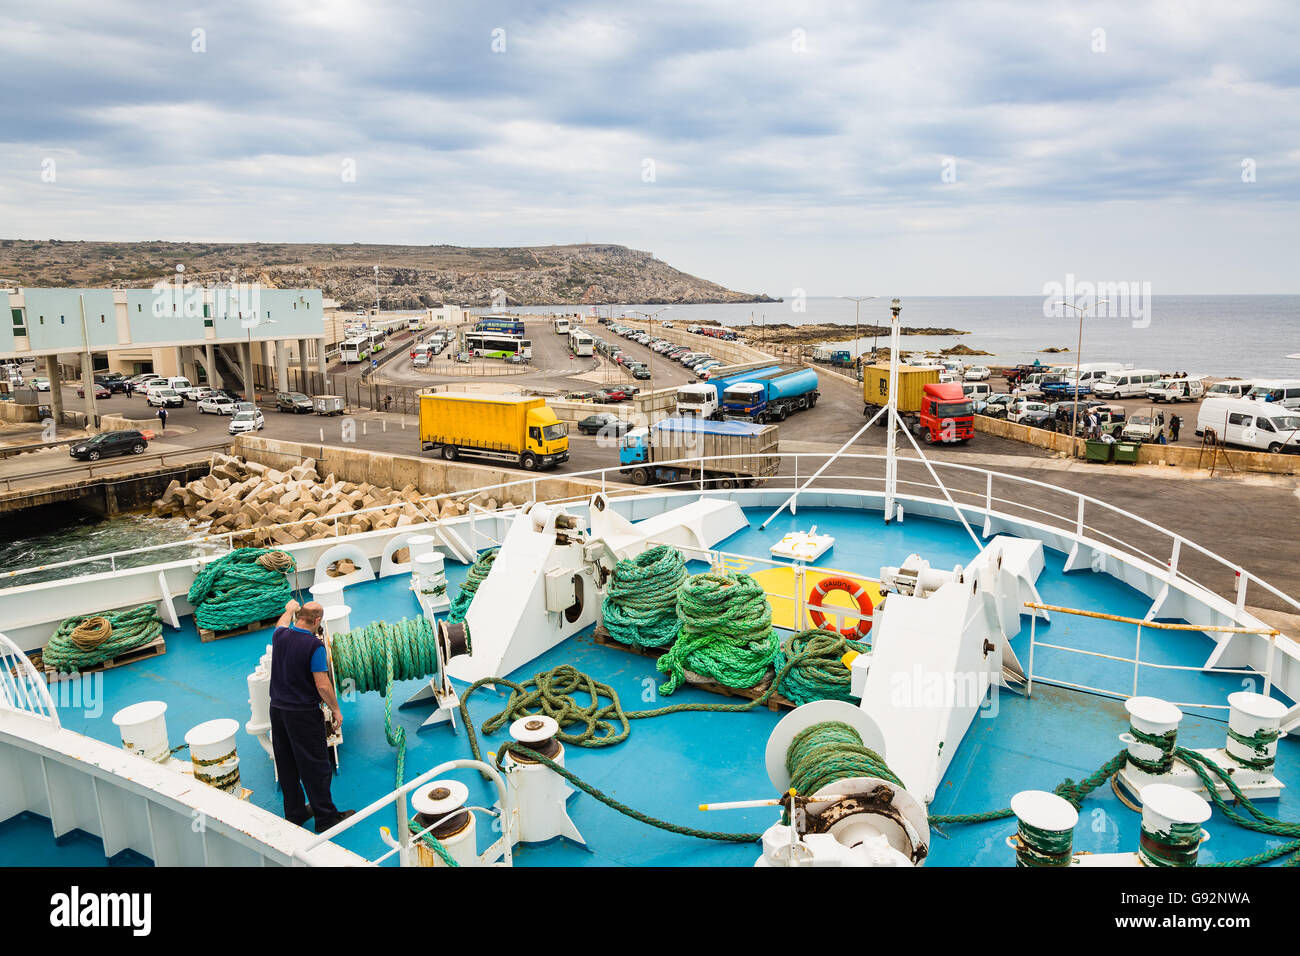 Cirkewwa, Malta - May 06, 2016: Ferries between the islands of Malta and Gozo transports people and cars shuttle system. Stock Photo